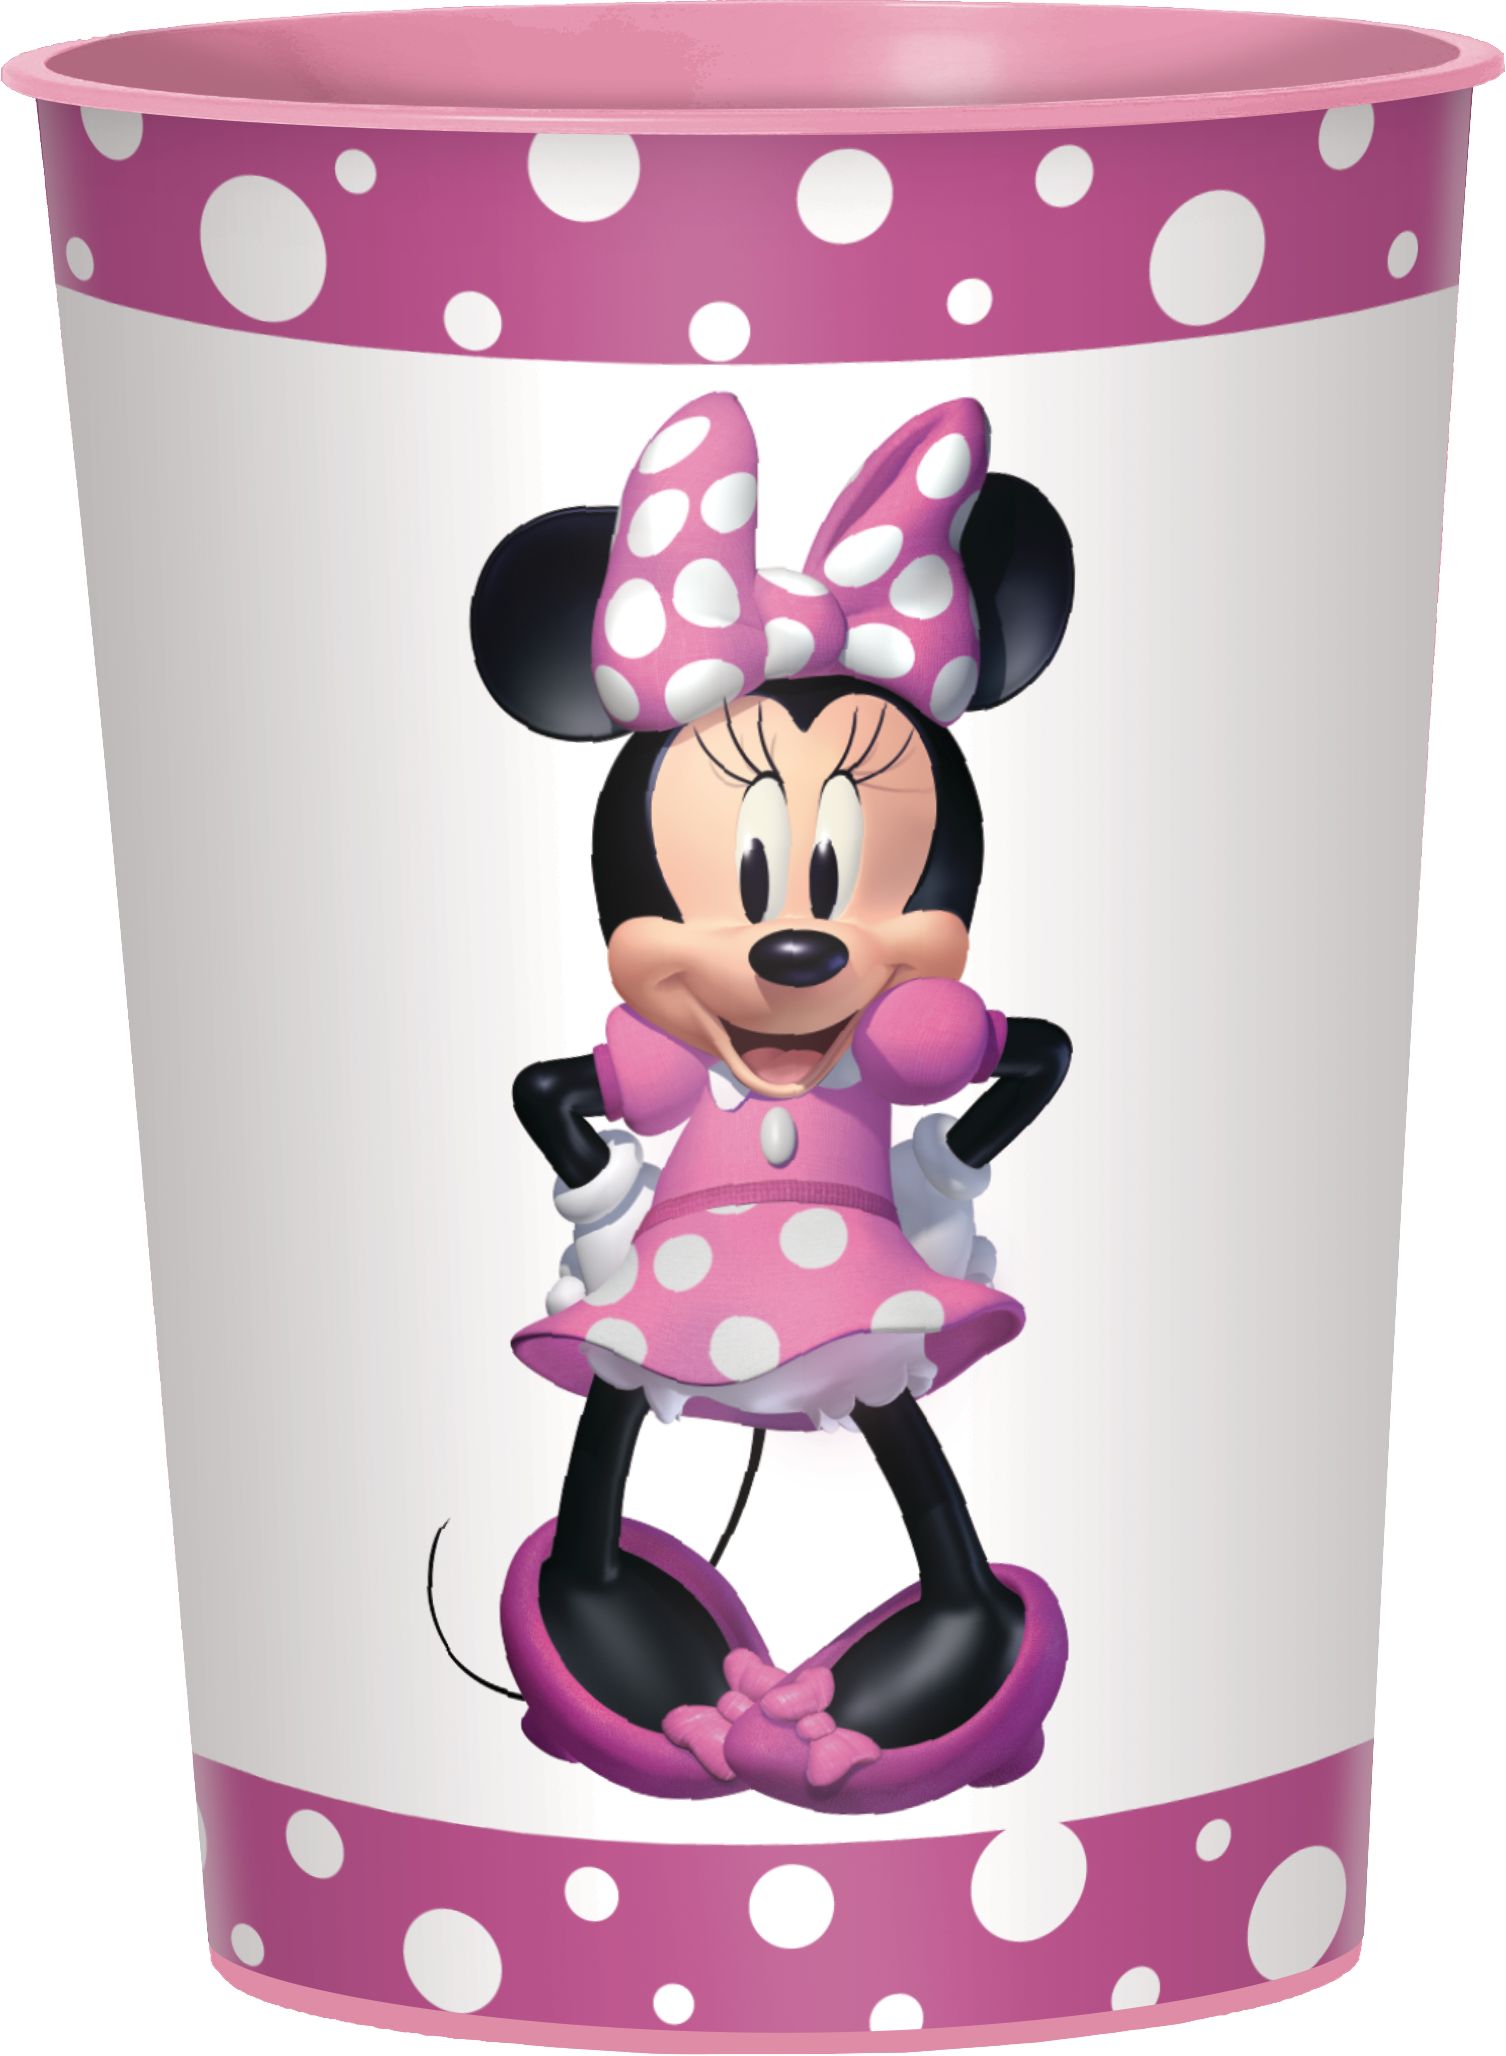 Disney Minnie Mouse Plastic Reusable Favour Cup, Pink/White, 16-oz, for  Birthday Party